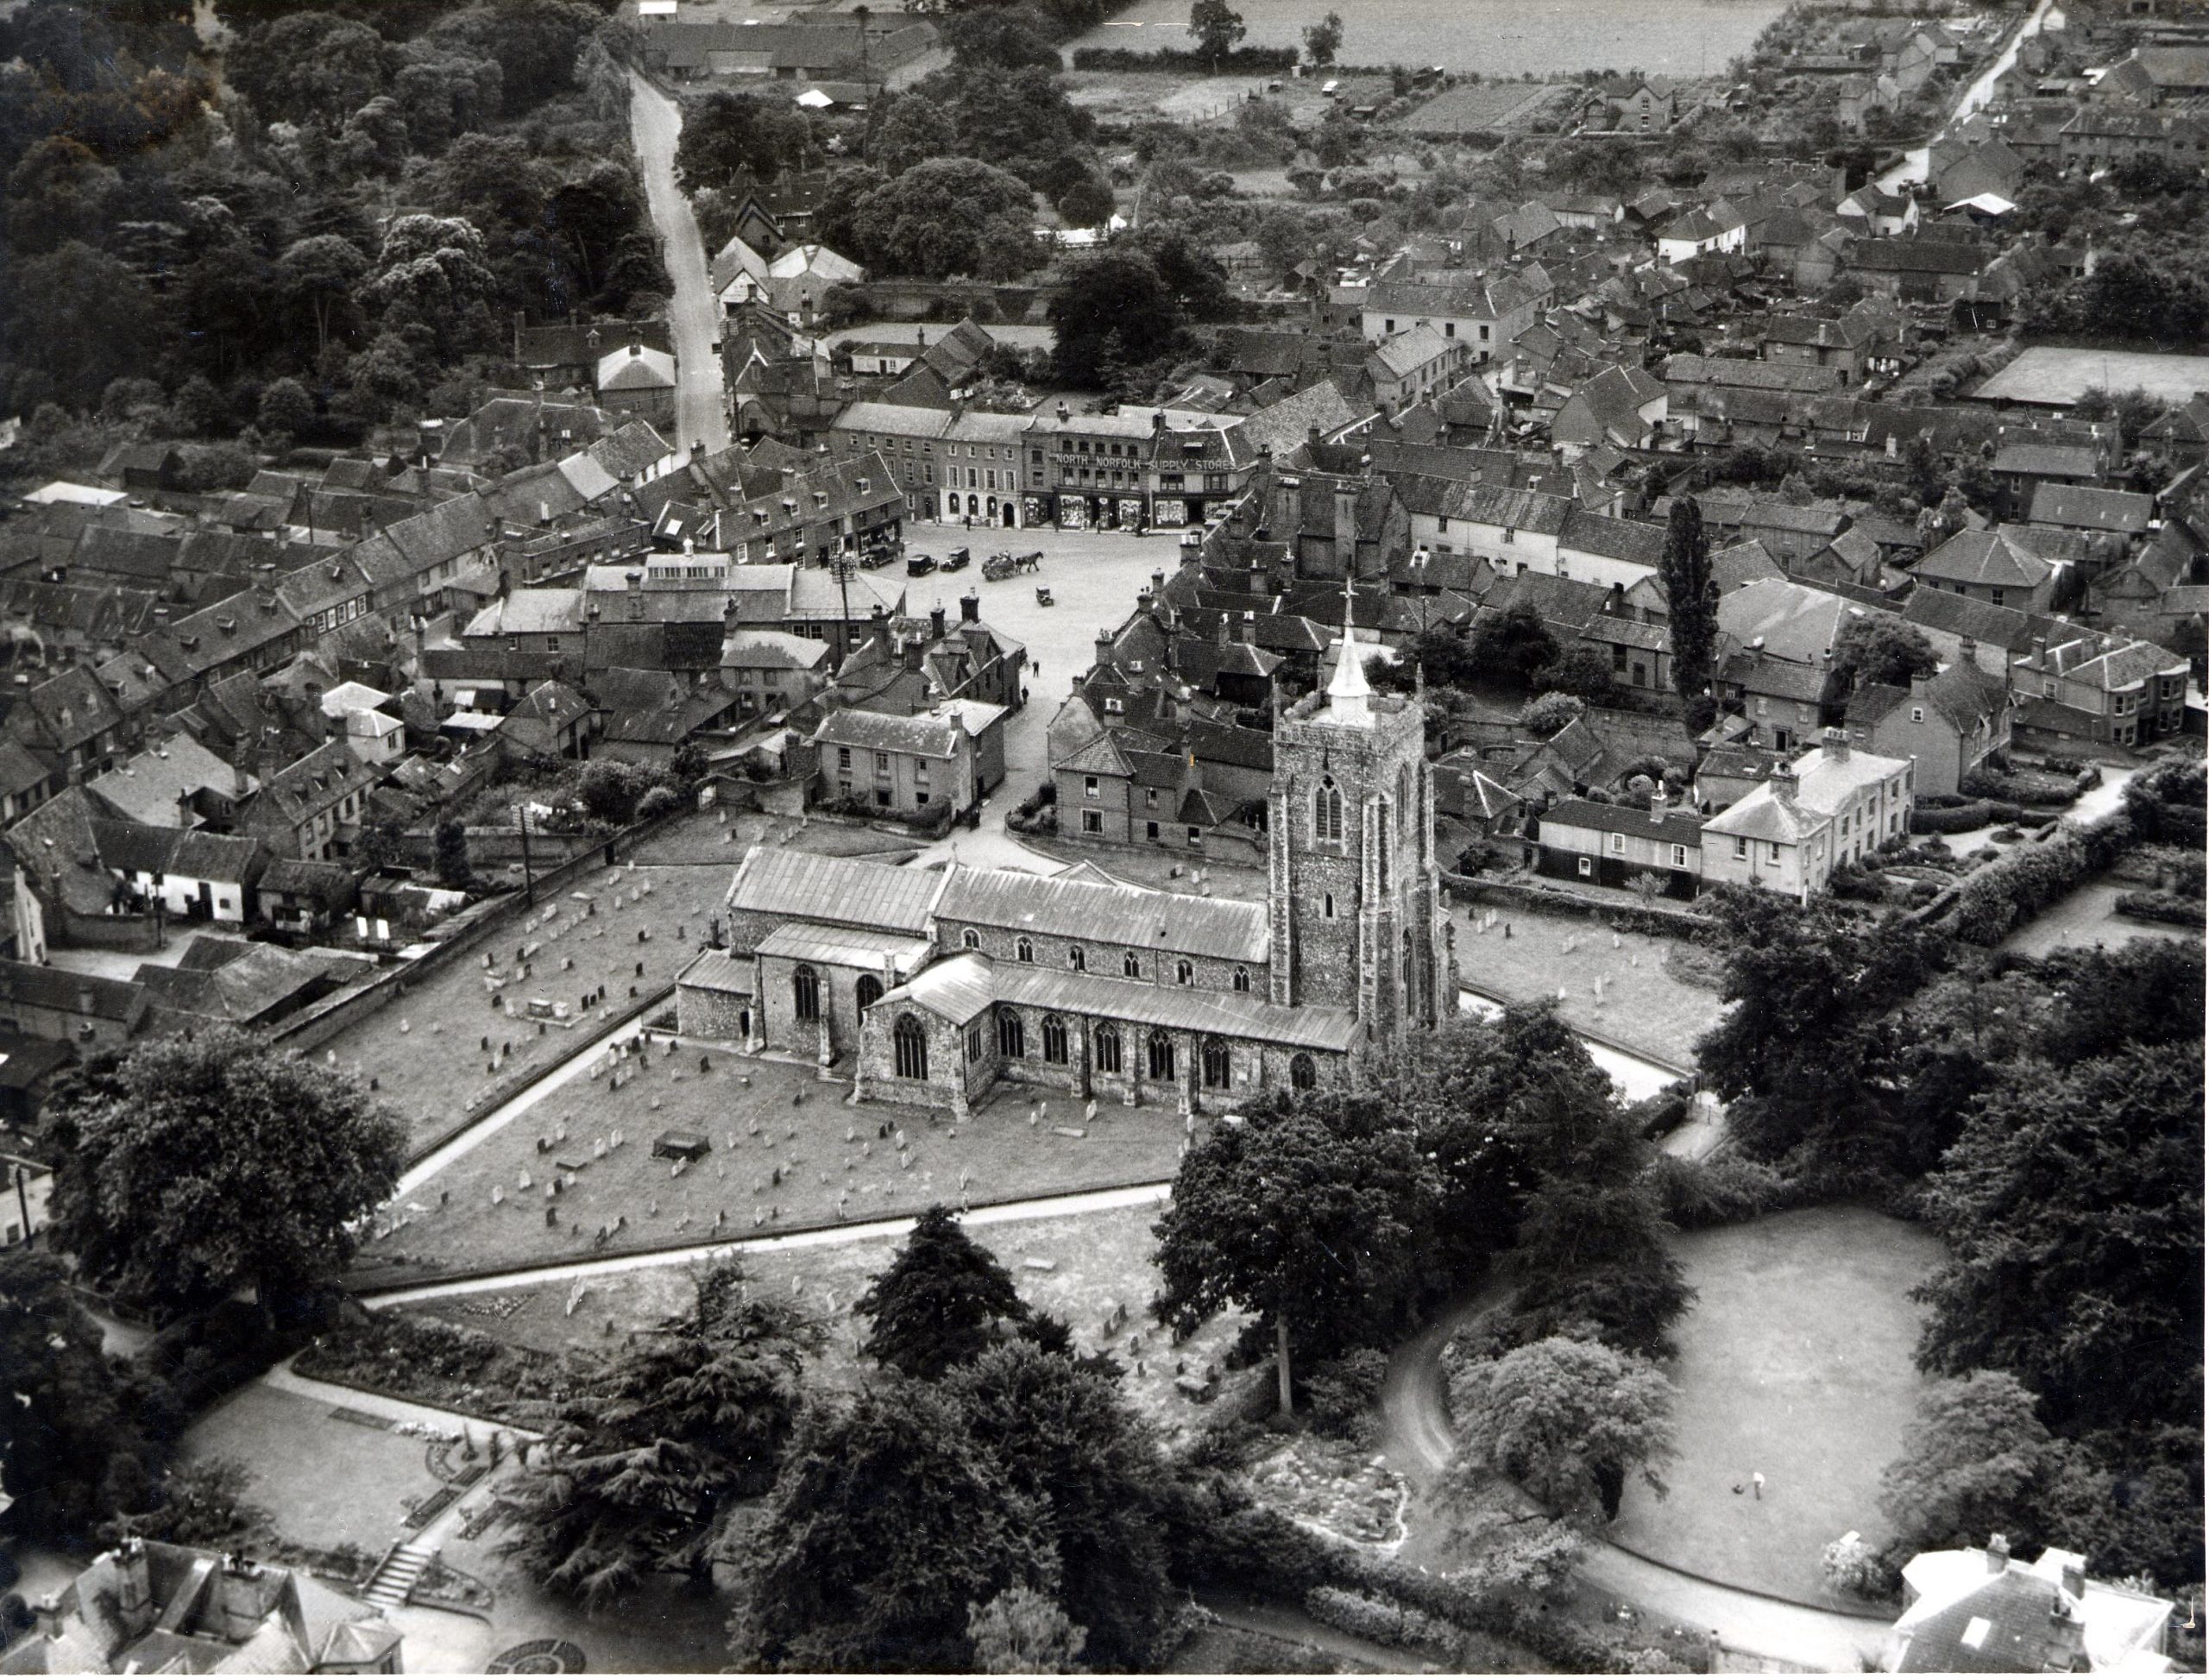 A3-1-2 - image from Town Archive